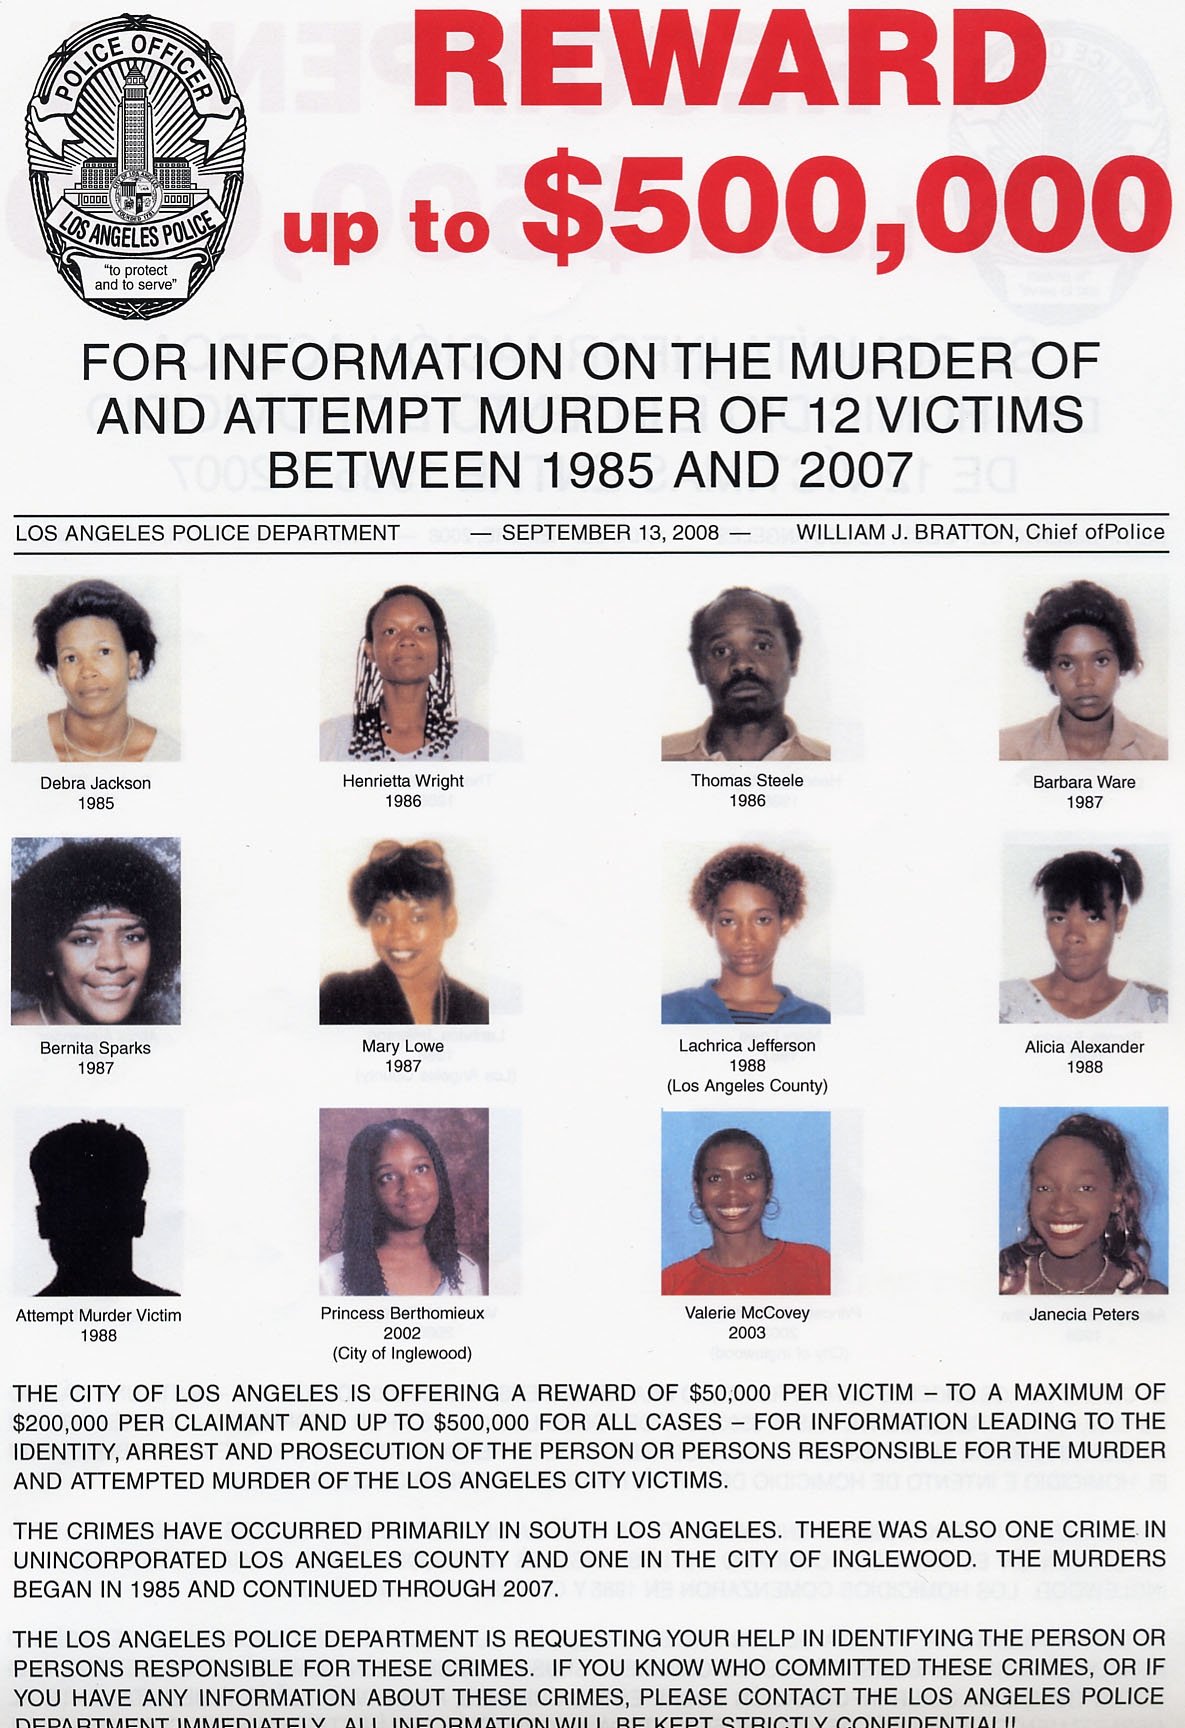 This is the reward poster provided by the LAPD for the Grim Sleeper. Lonnie David Franklin Jr. is accused of being the Los Angeles-area serial killer known as the Grim Sleeper.